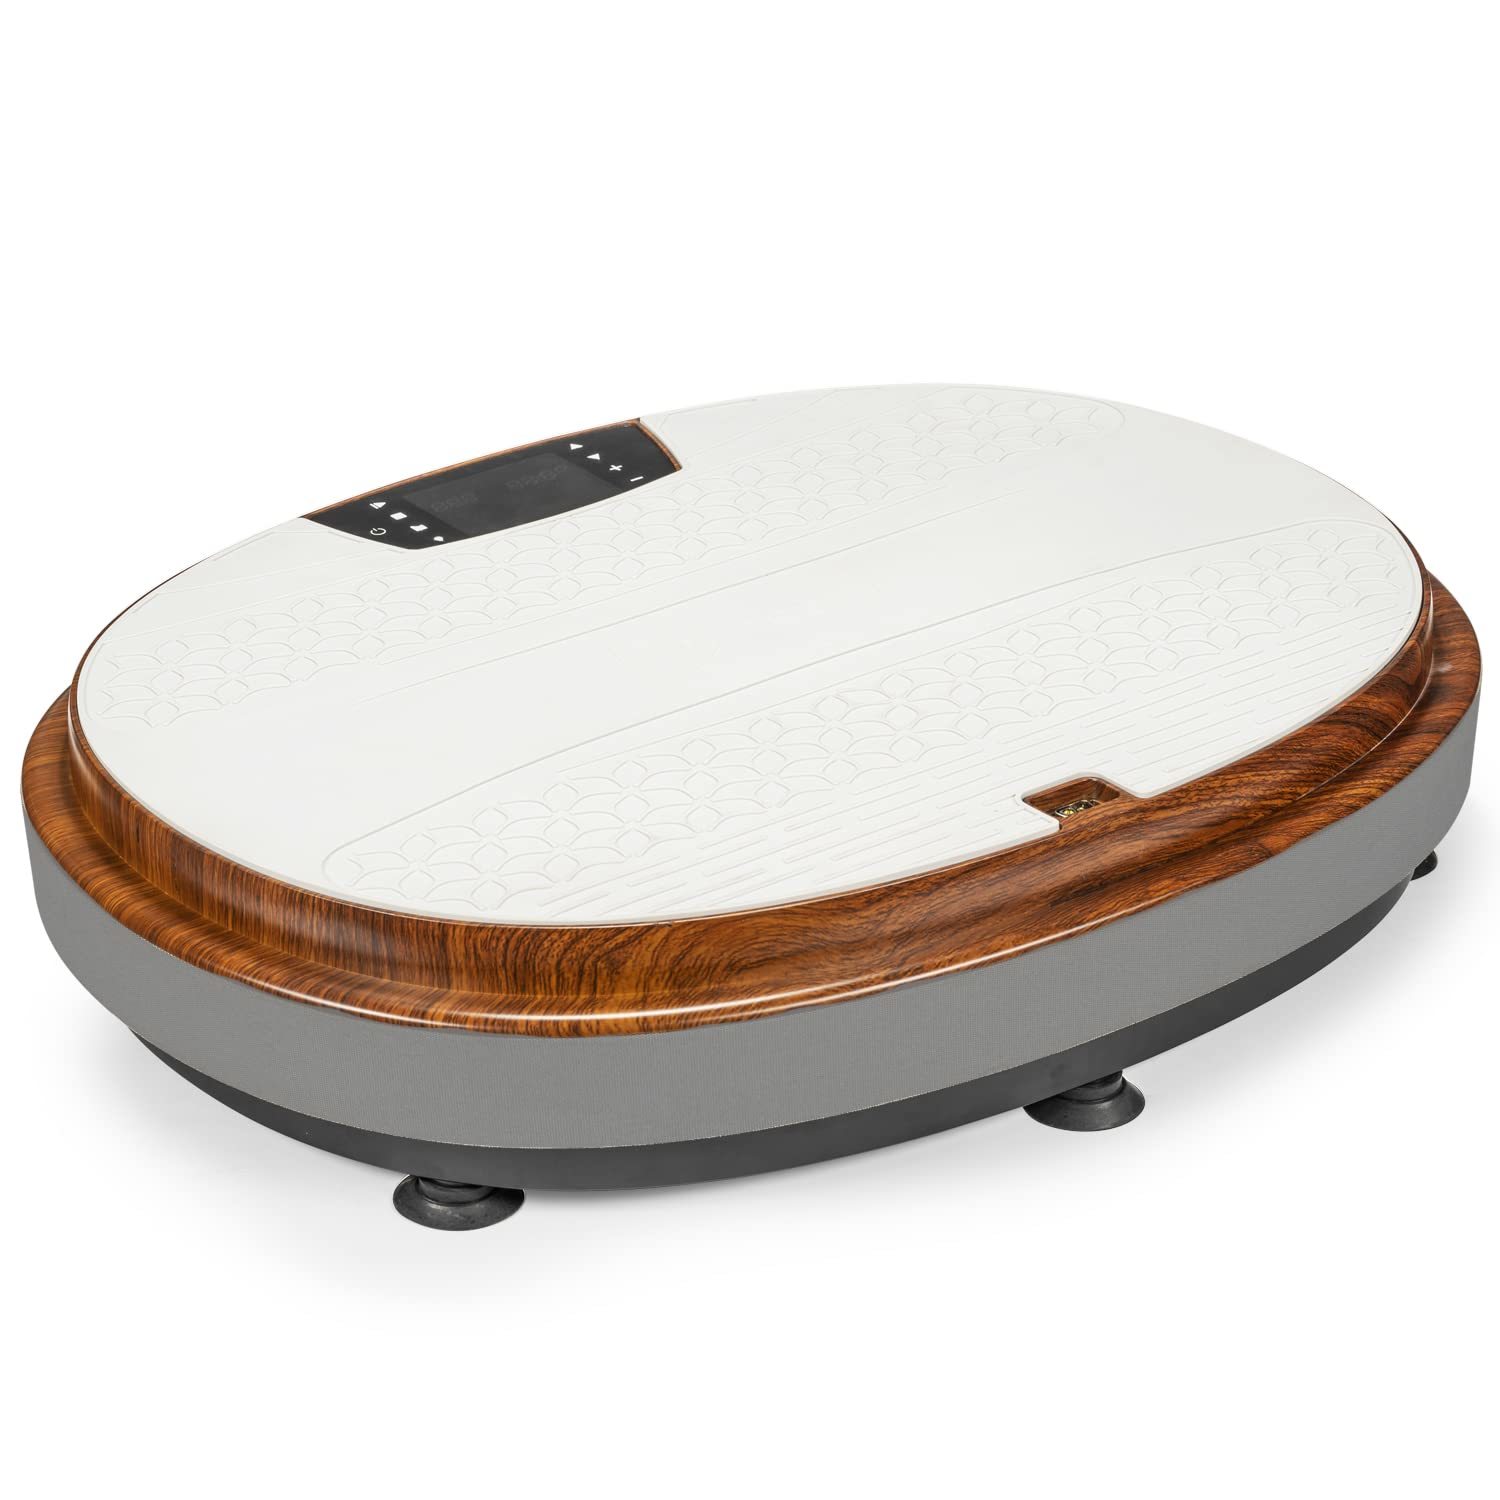 Primary image for Relaxavibe Vibration Plate Exercise Machine - Vibration Platform For Circulation